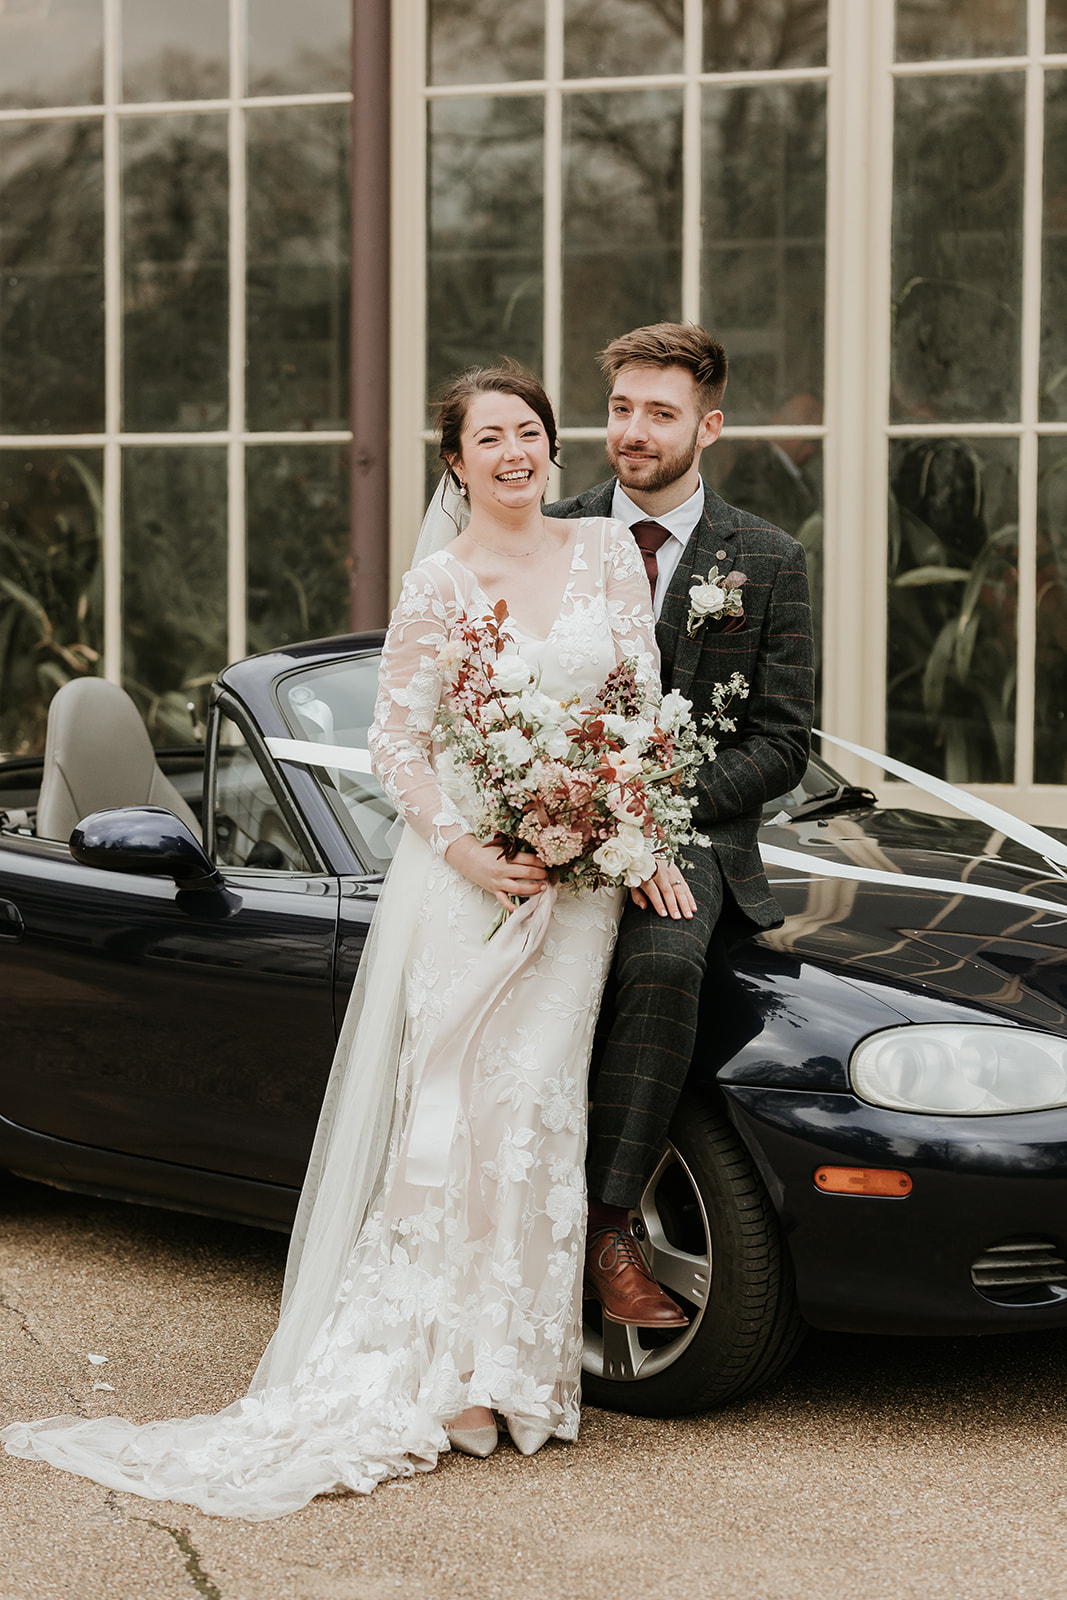 Couples portrait outside the Pavilion gardens with a classic car, lace dress and stylish suit.